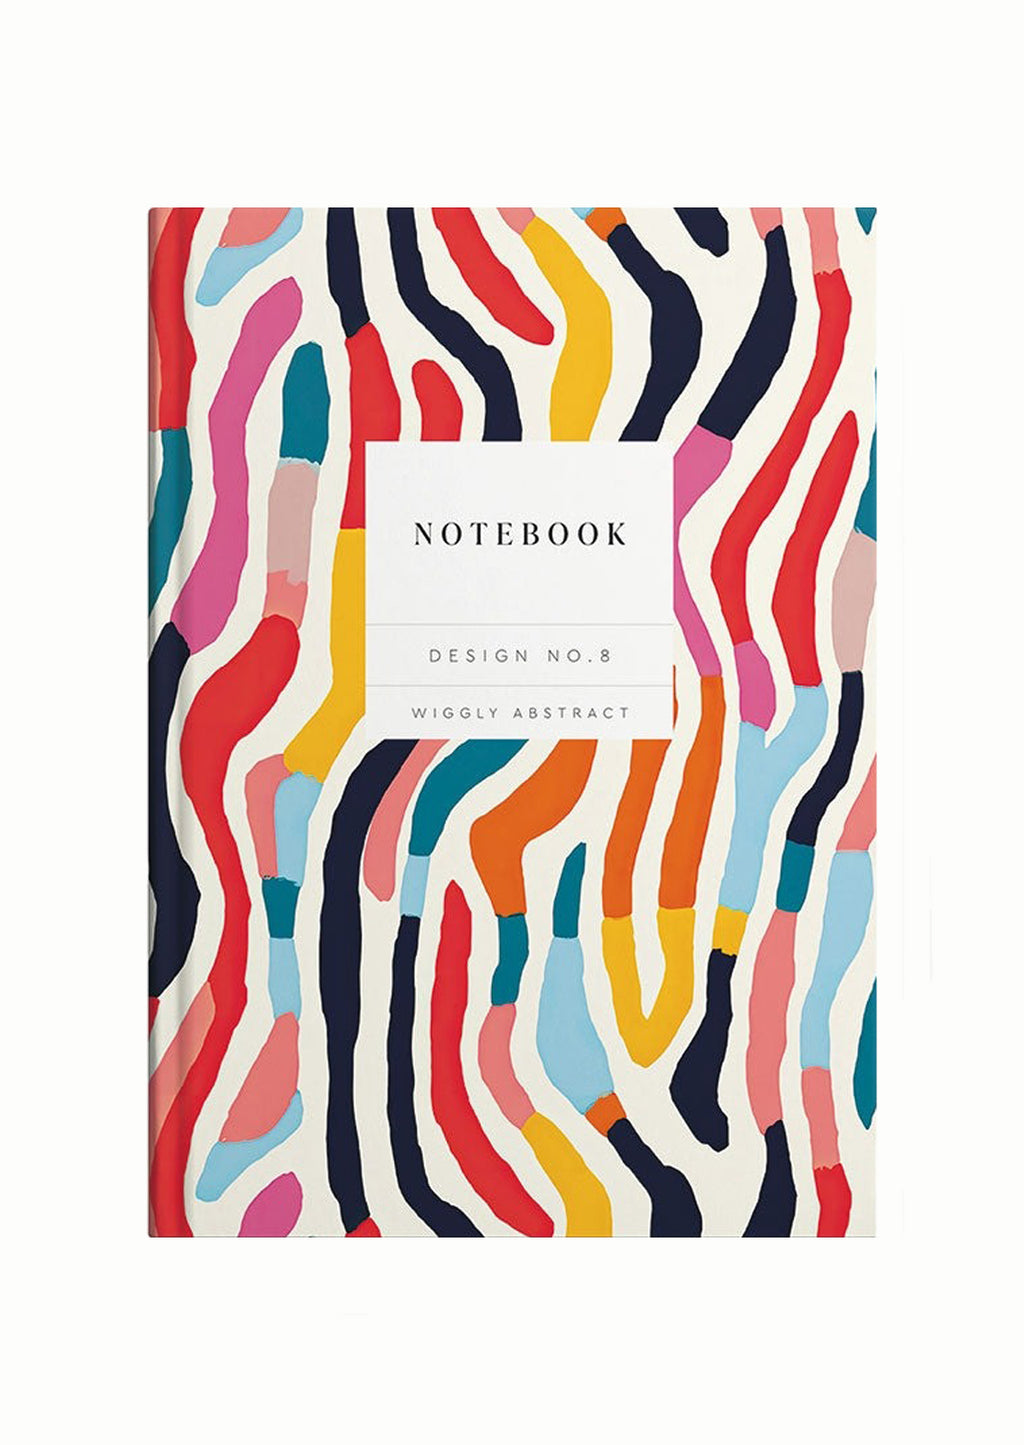 Wiggly Abstract: A hardcover notebook with abstract print cover.